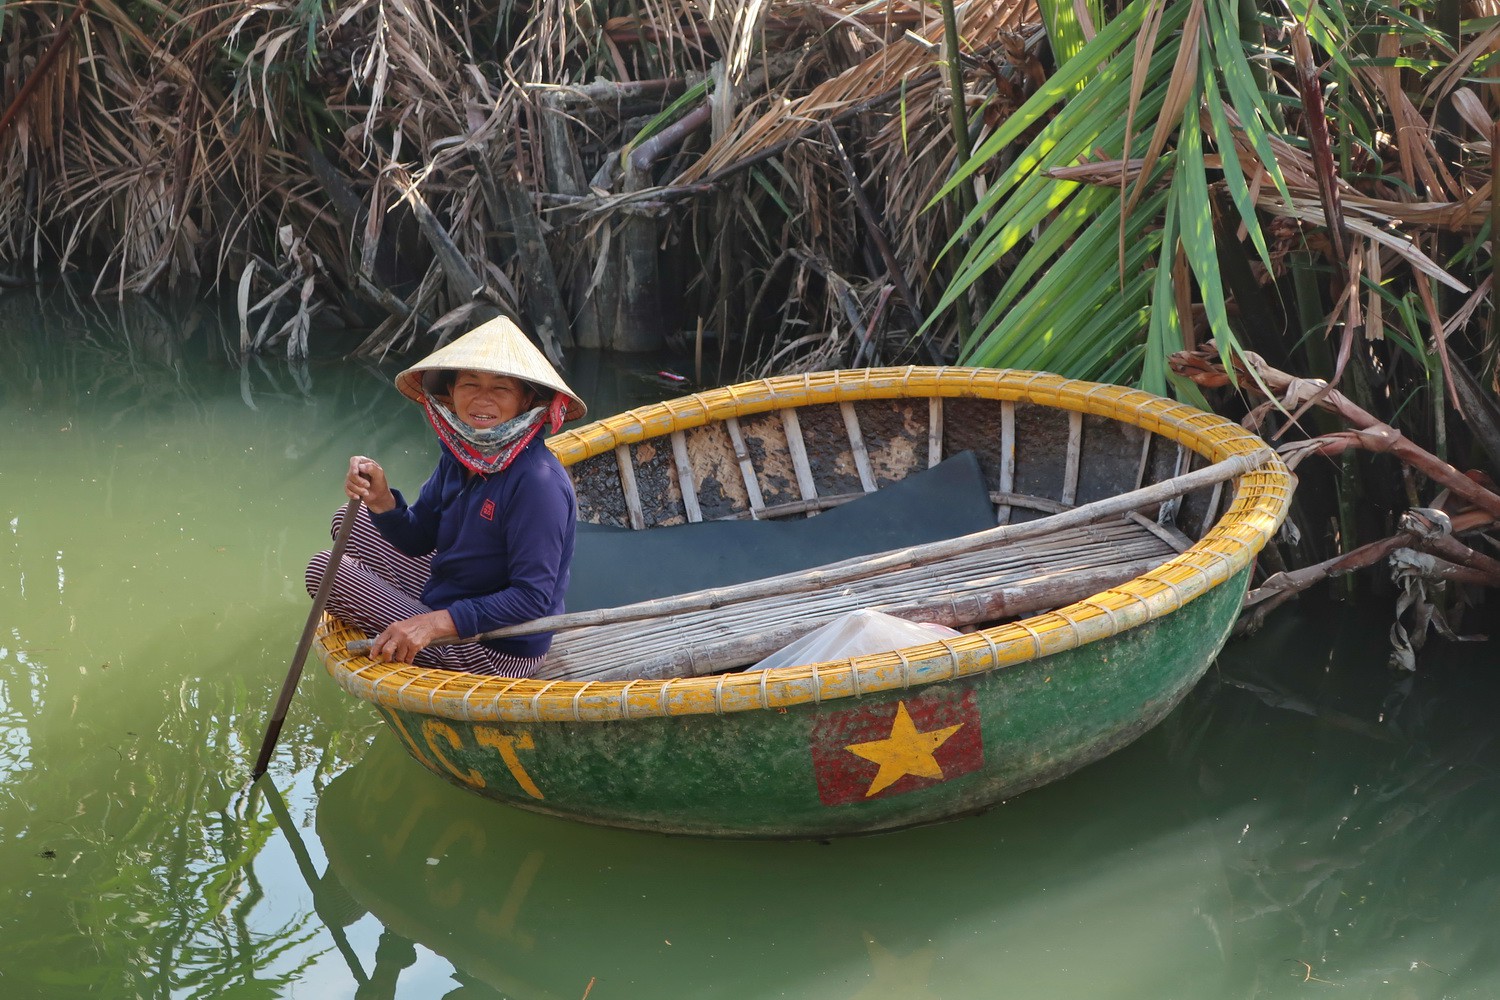 Lady in a tiny round boat